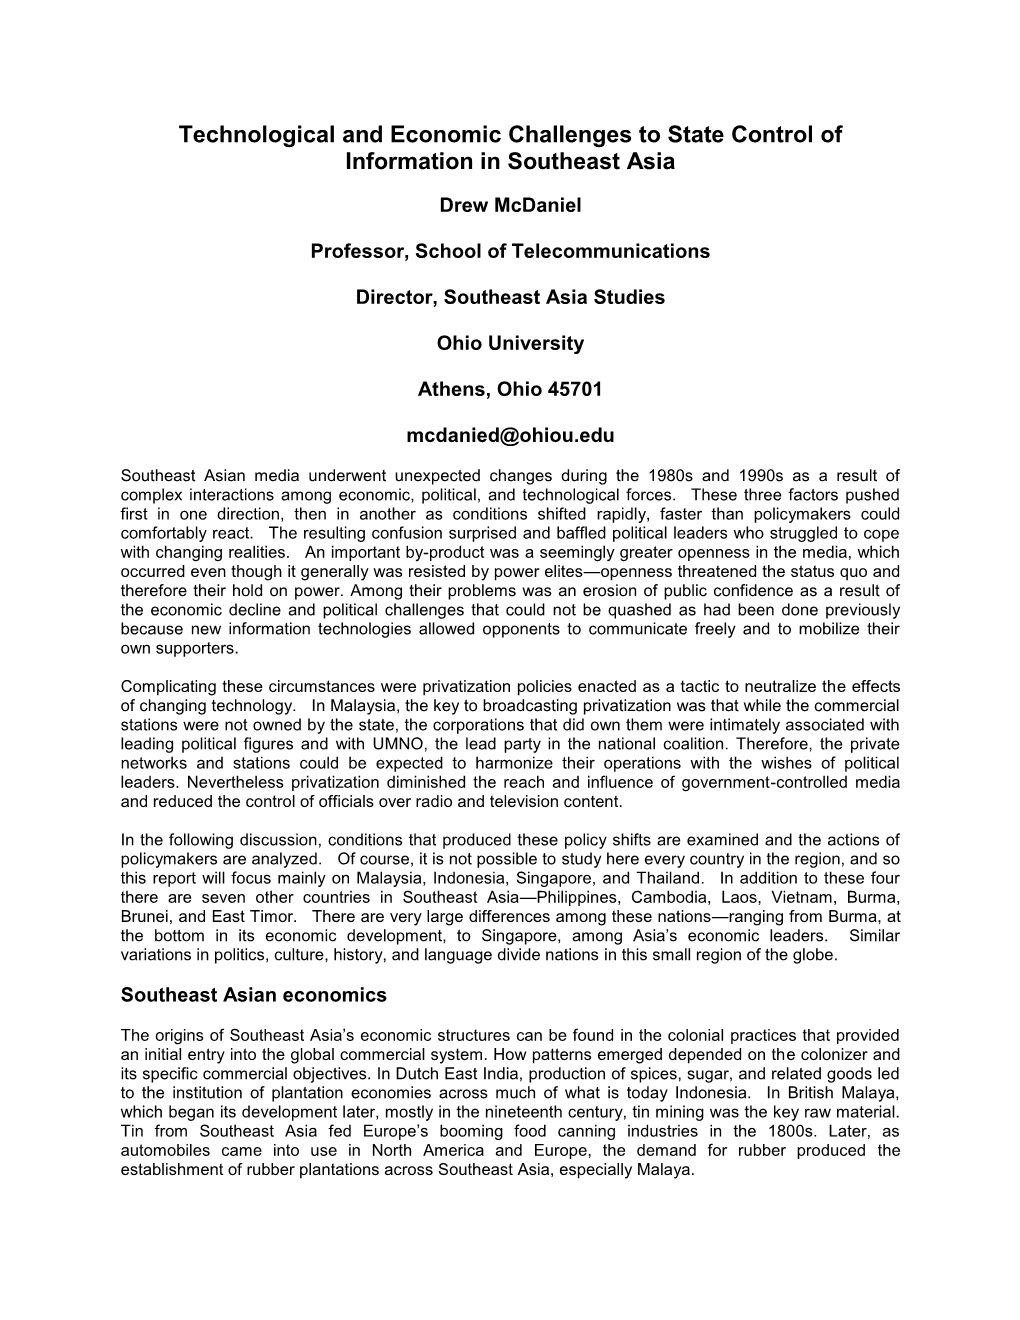 Technological and Economic Challenges to State Control of Information in Southeast Asia